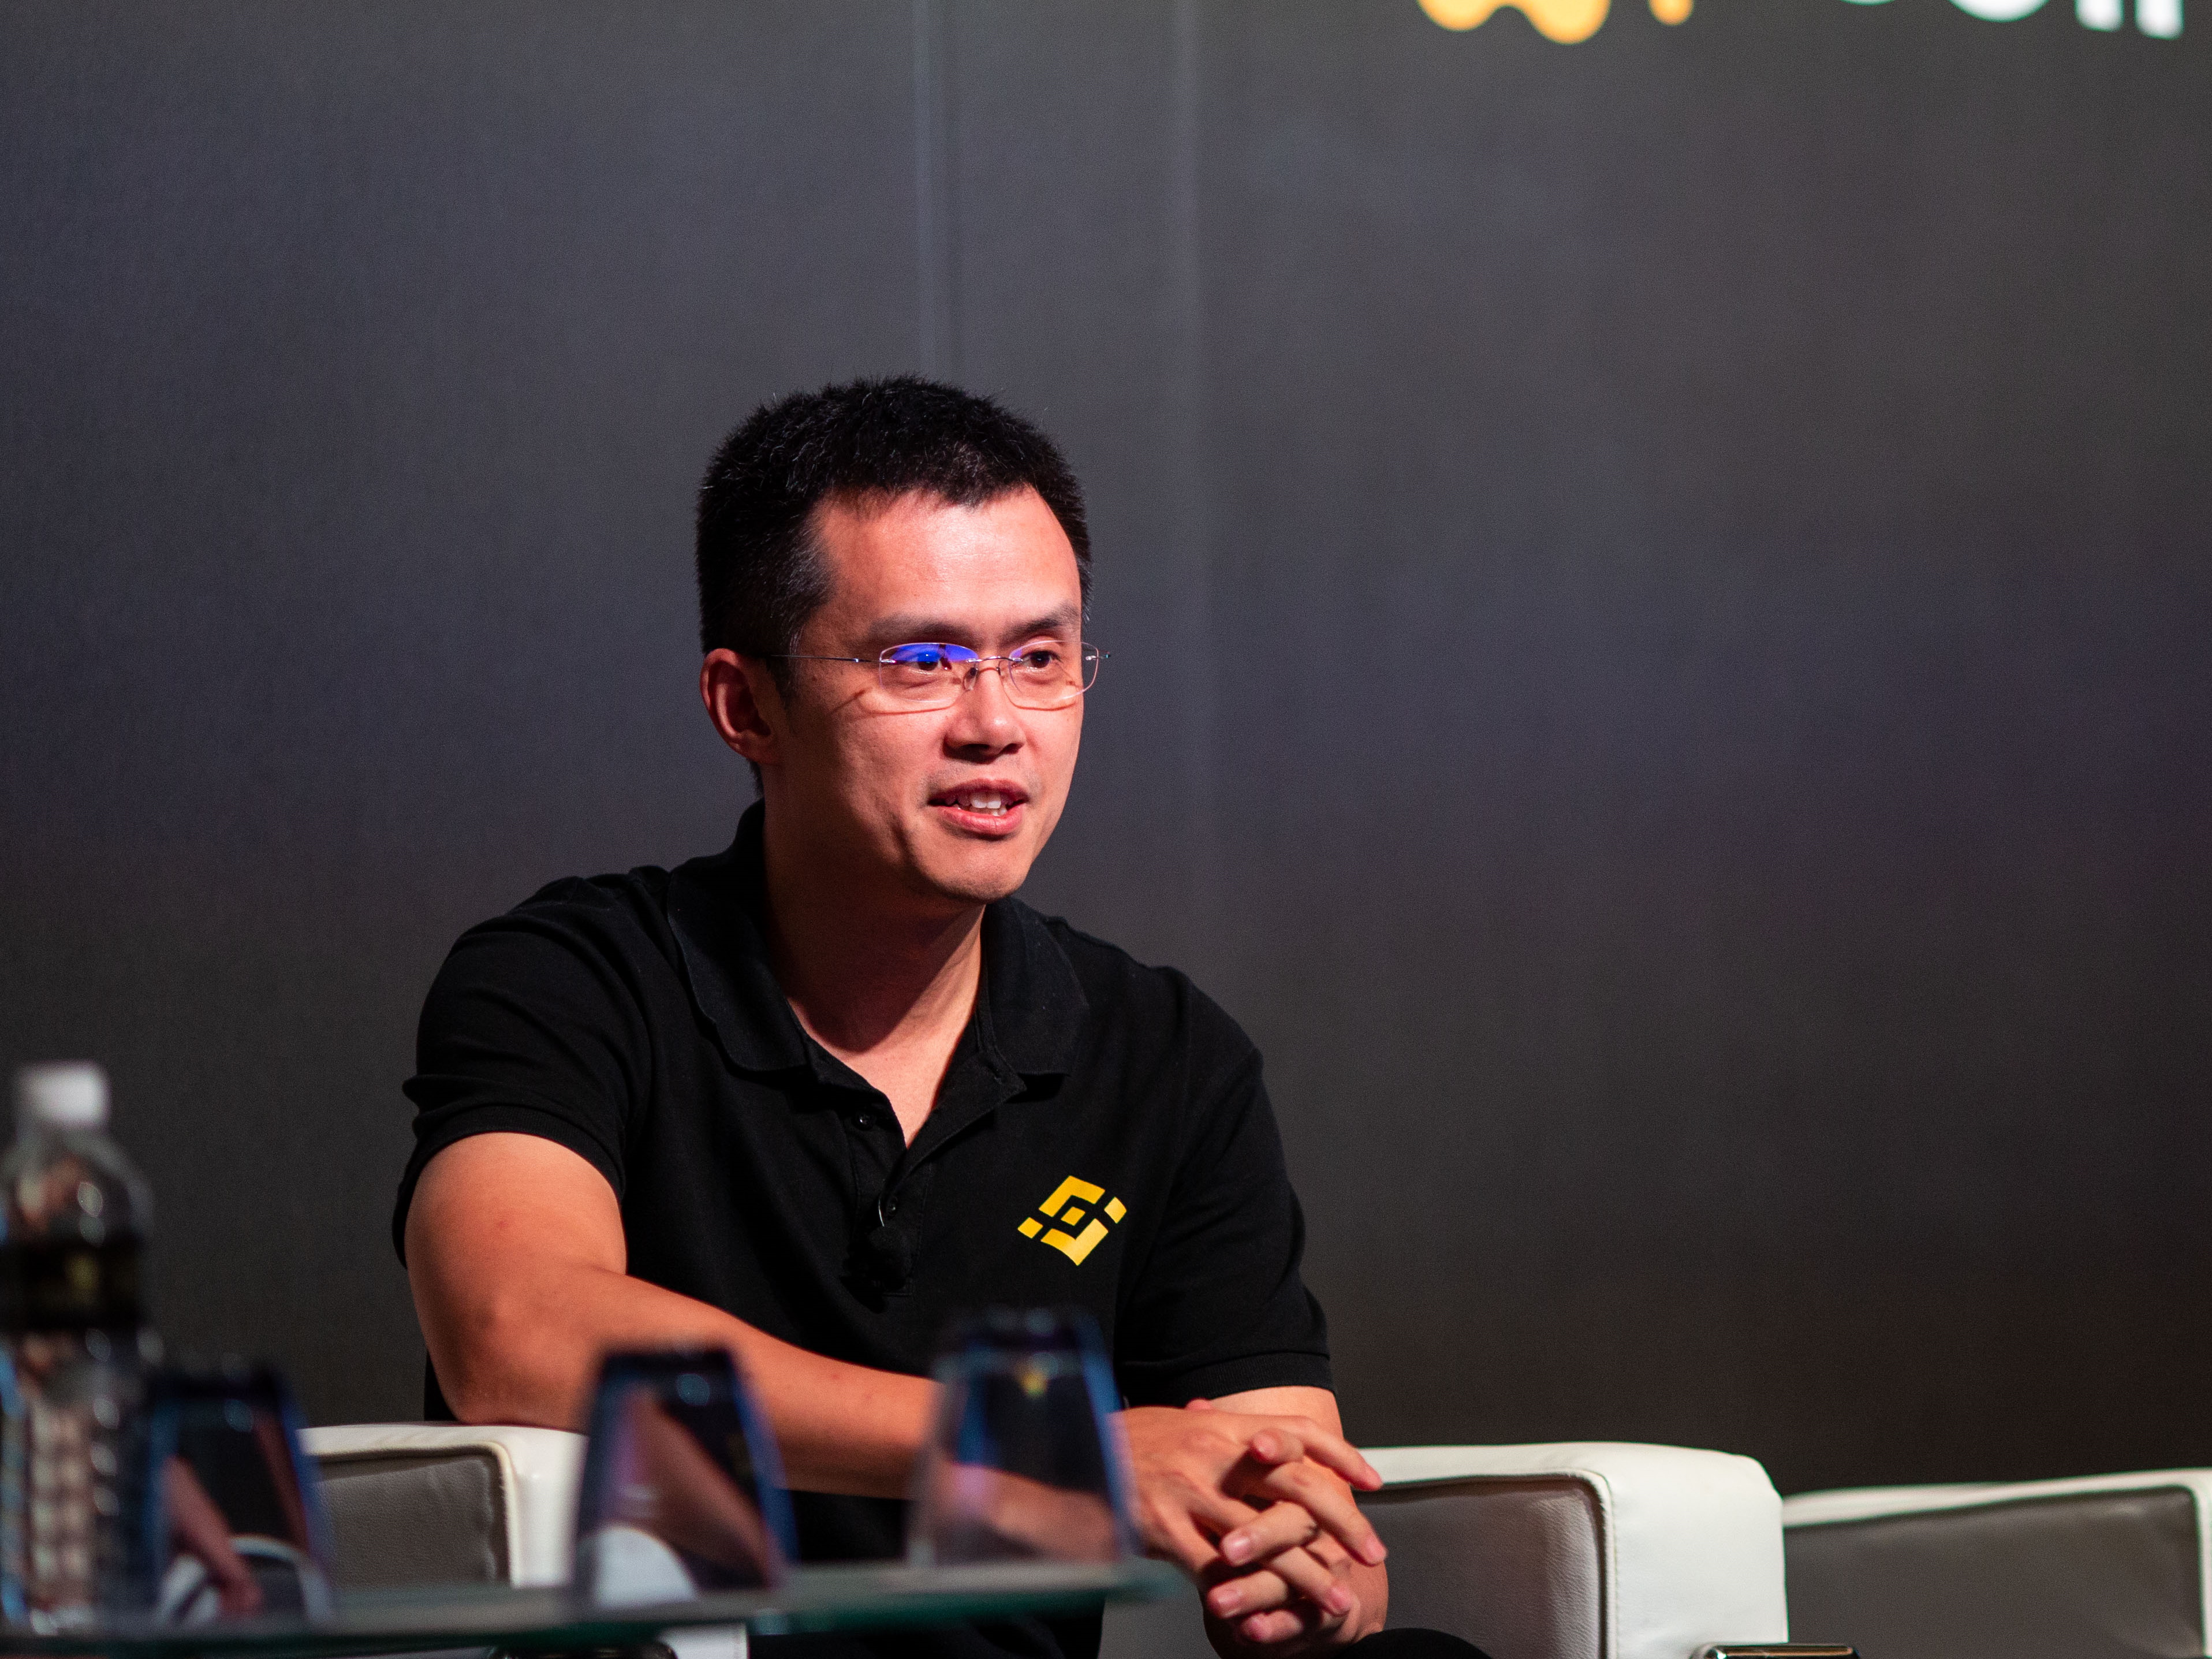 DeFi Protocol Tranchess Meets Target to Become Binance Smart Chain Validator Node, Launches BNB Fund